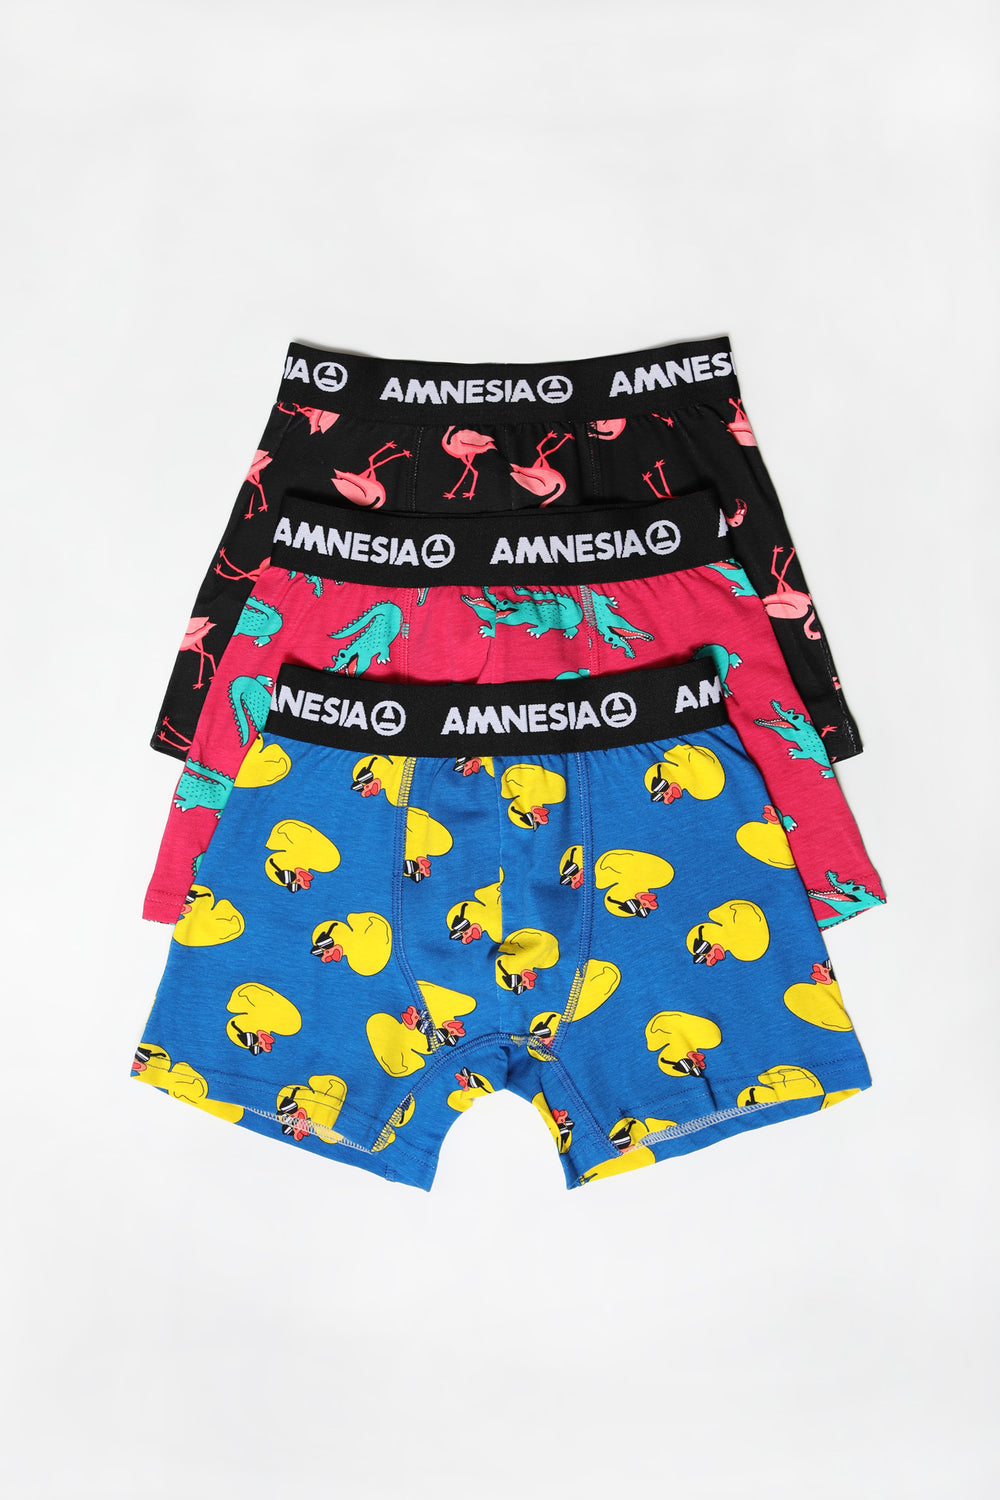 Amnesia Youth 3-Pack Animal Print Boxer Briefs Amnesia Youth 3-Pack Animal Print Boxer Briefs